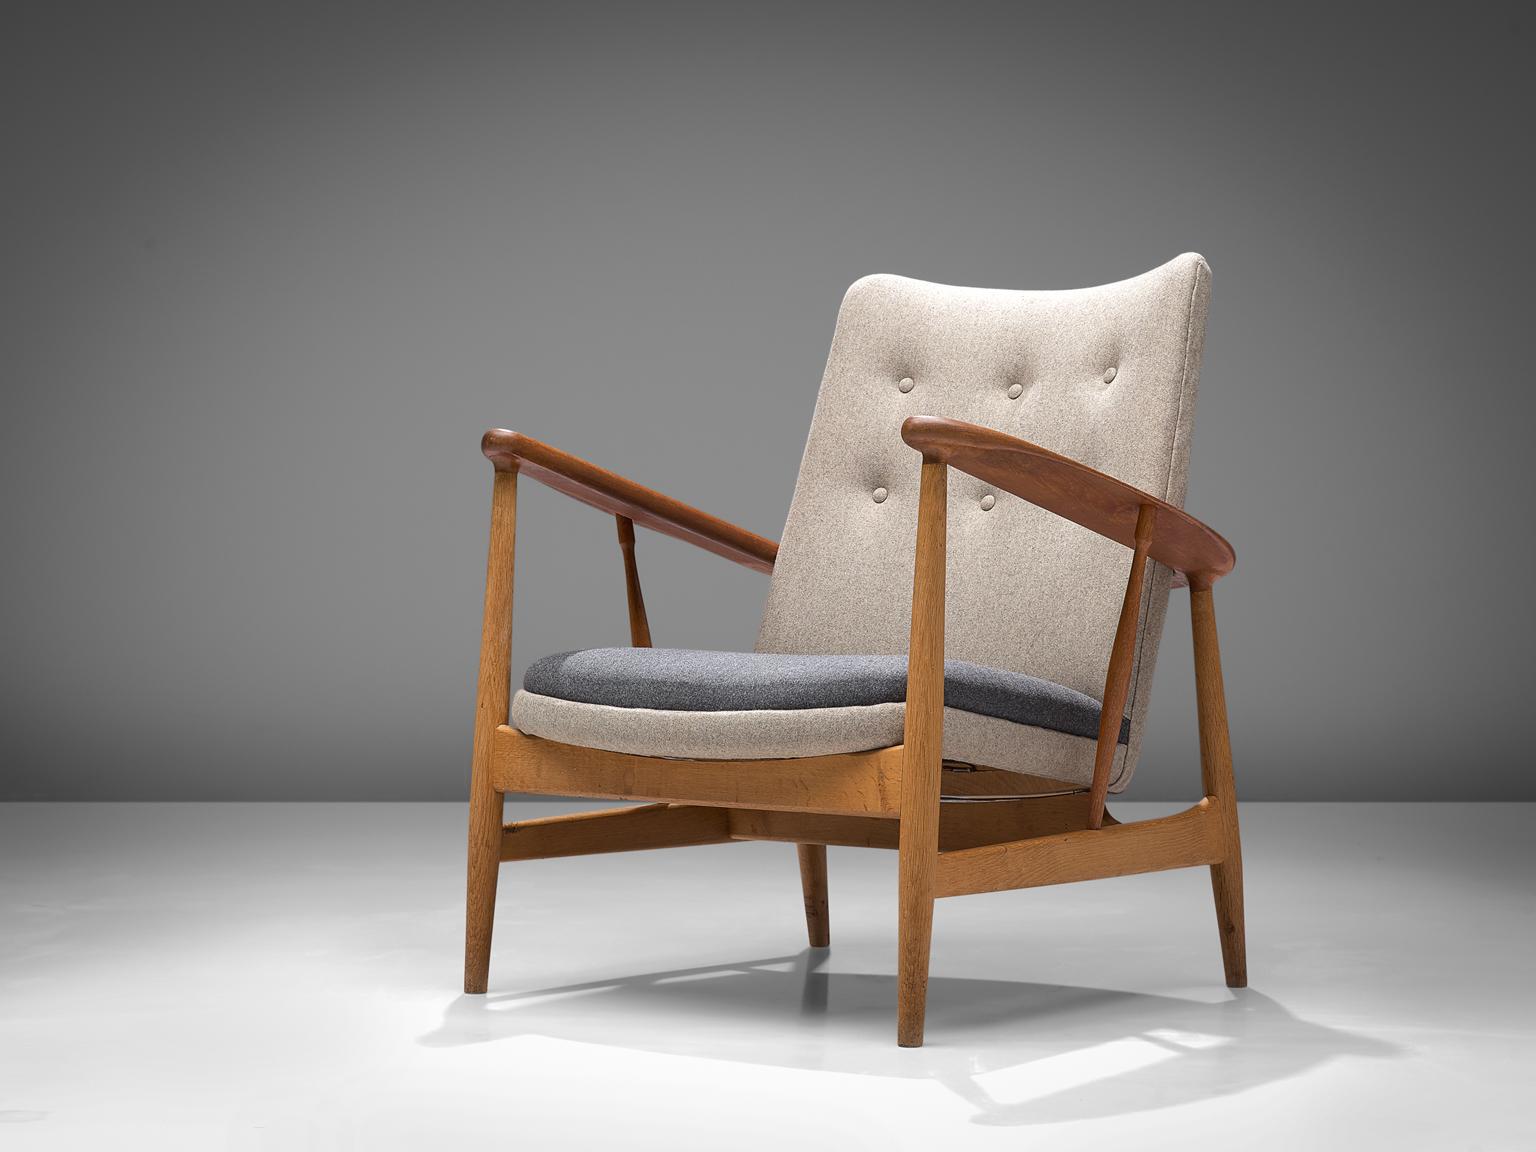 Finn Juhl for Søren Willadsen Møbel-Fabrik, easy chair SW 86, teak and oak, Denmark, 1953.

This chair has been designed in 1953 by Finn Juhl. This chair is one of the three designs by Juhl that were produced by Søren Willadsen. This easy chair is